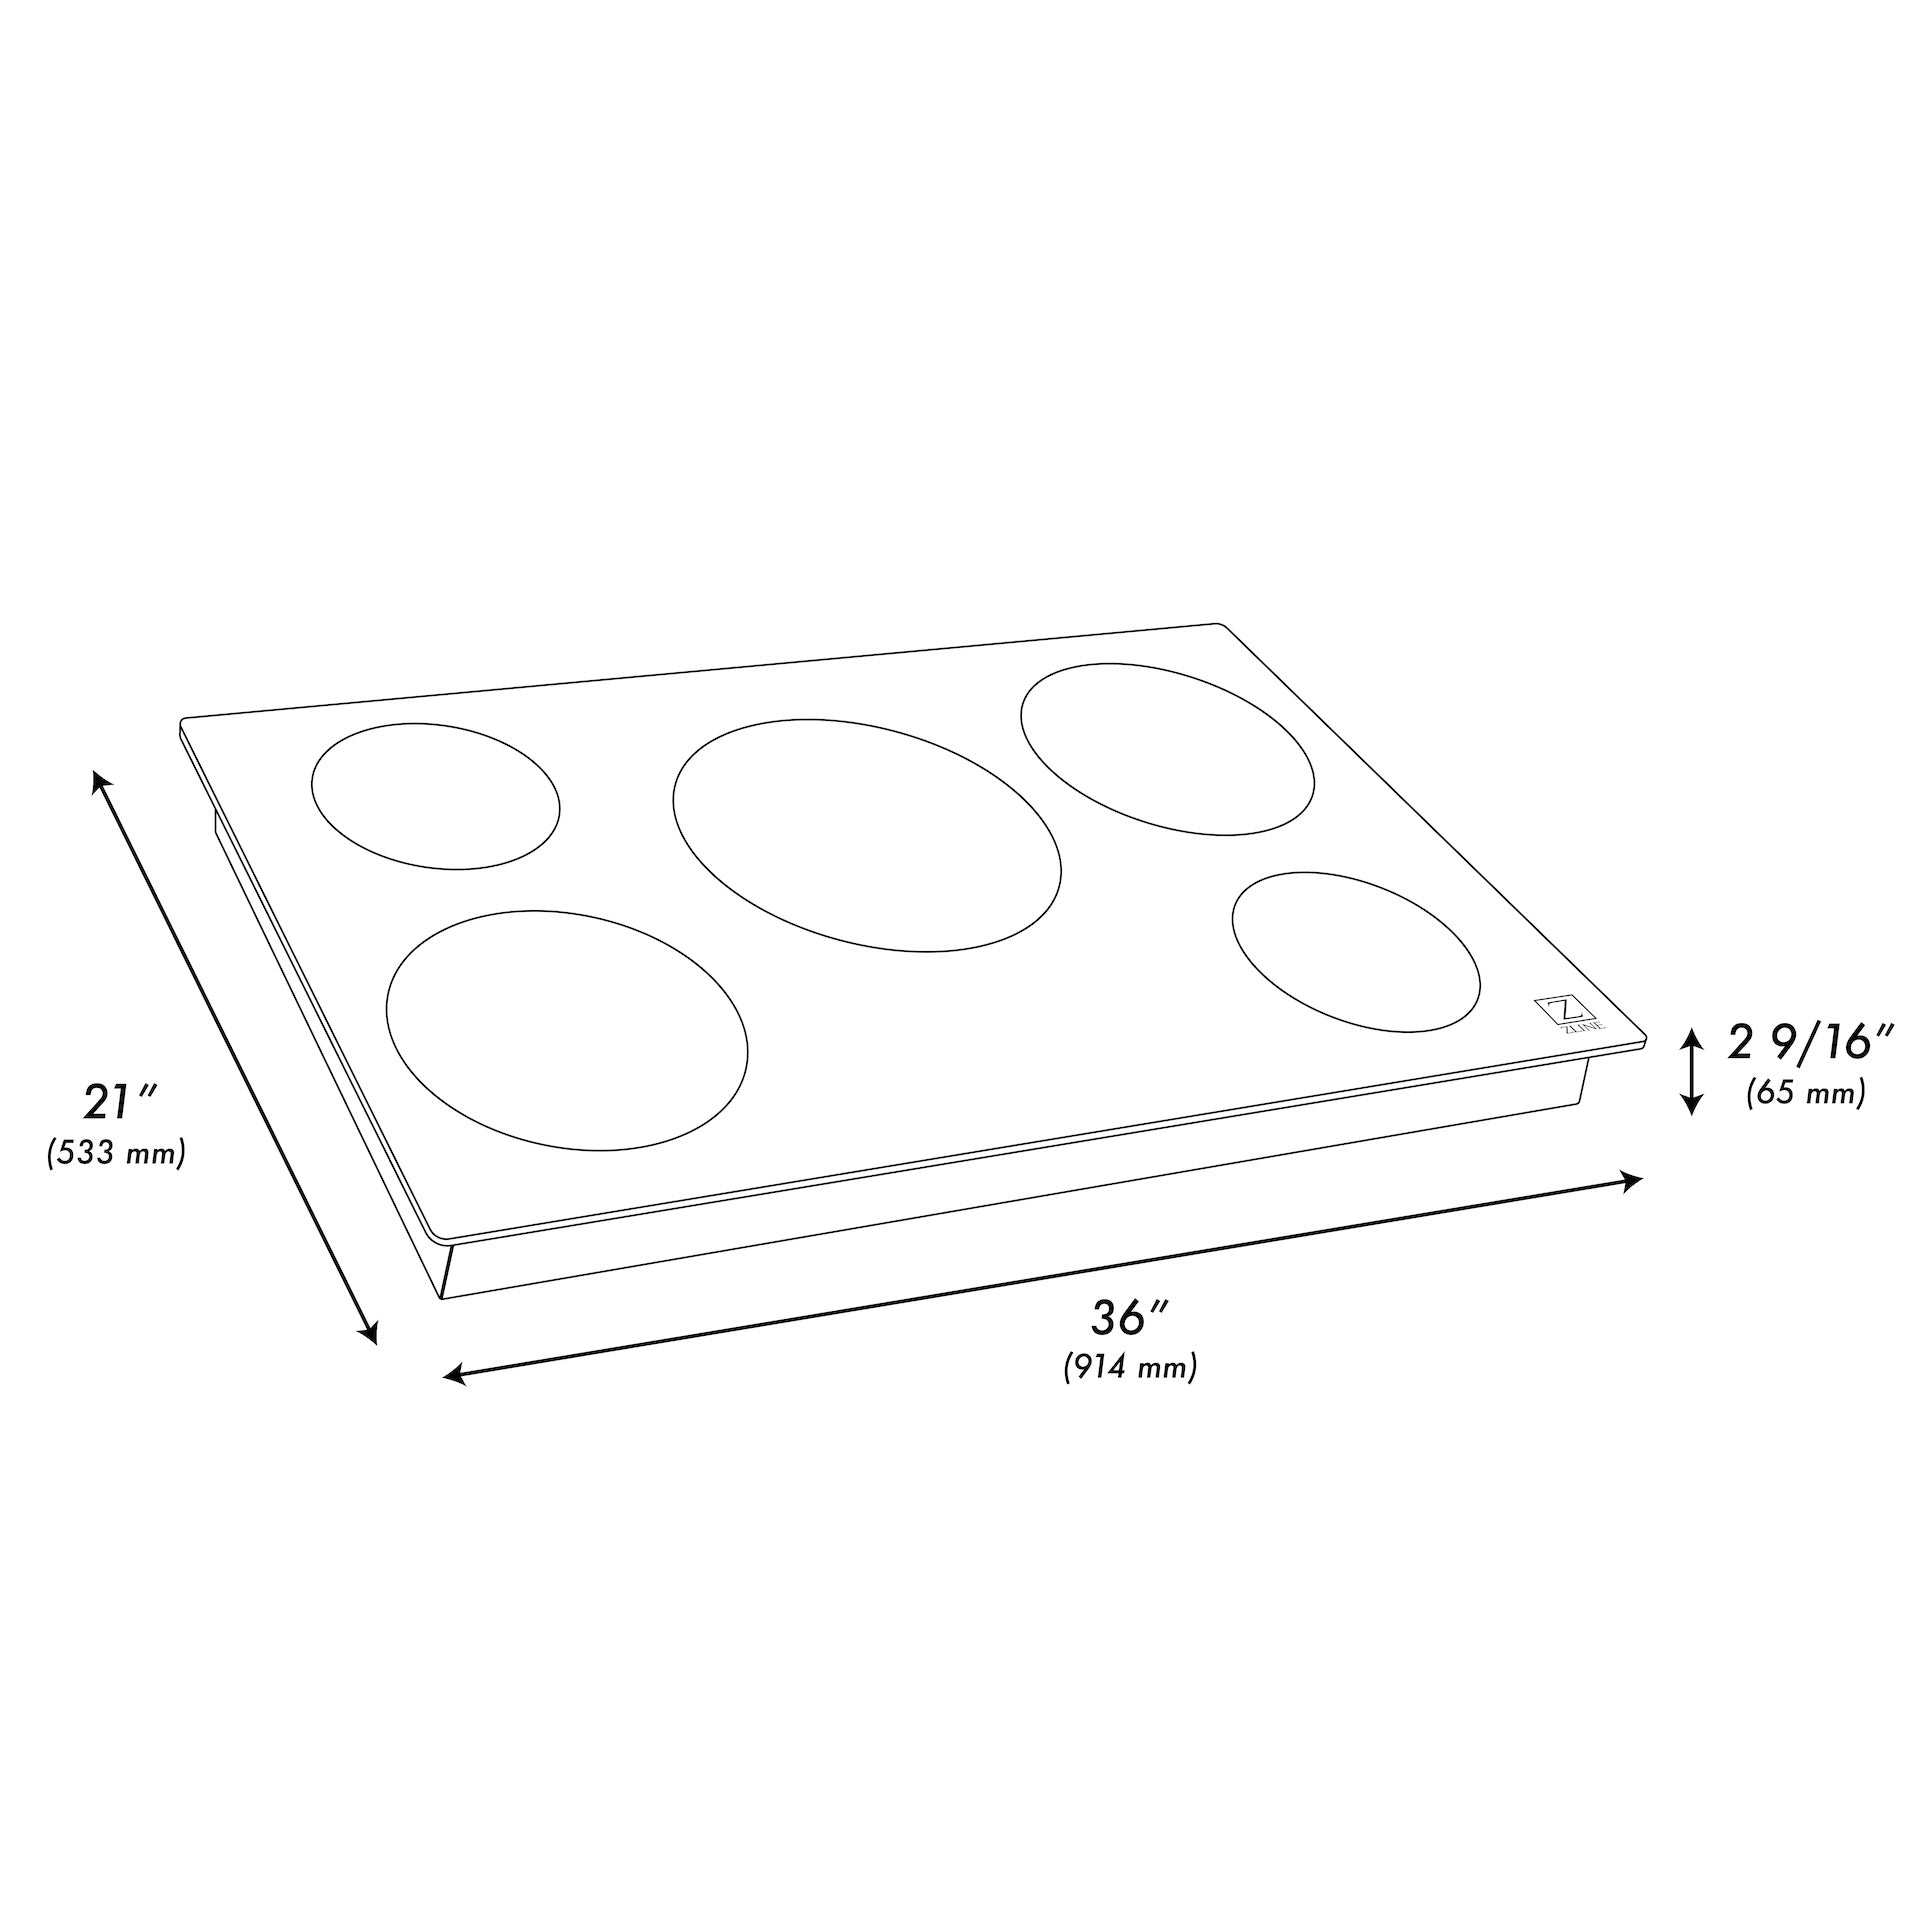 ZLINE 36 in. Induction Cooktop with 5 burners (RCIND-36) dimensional diagram with measurements.